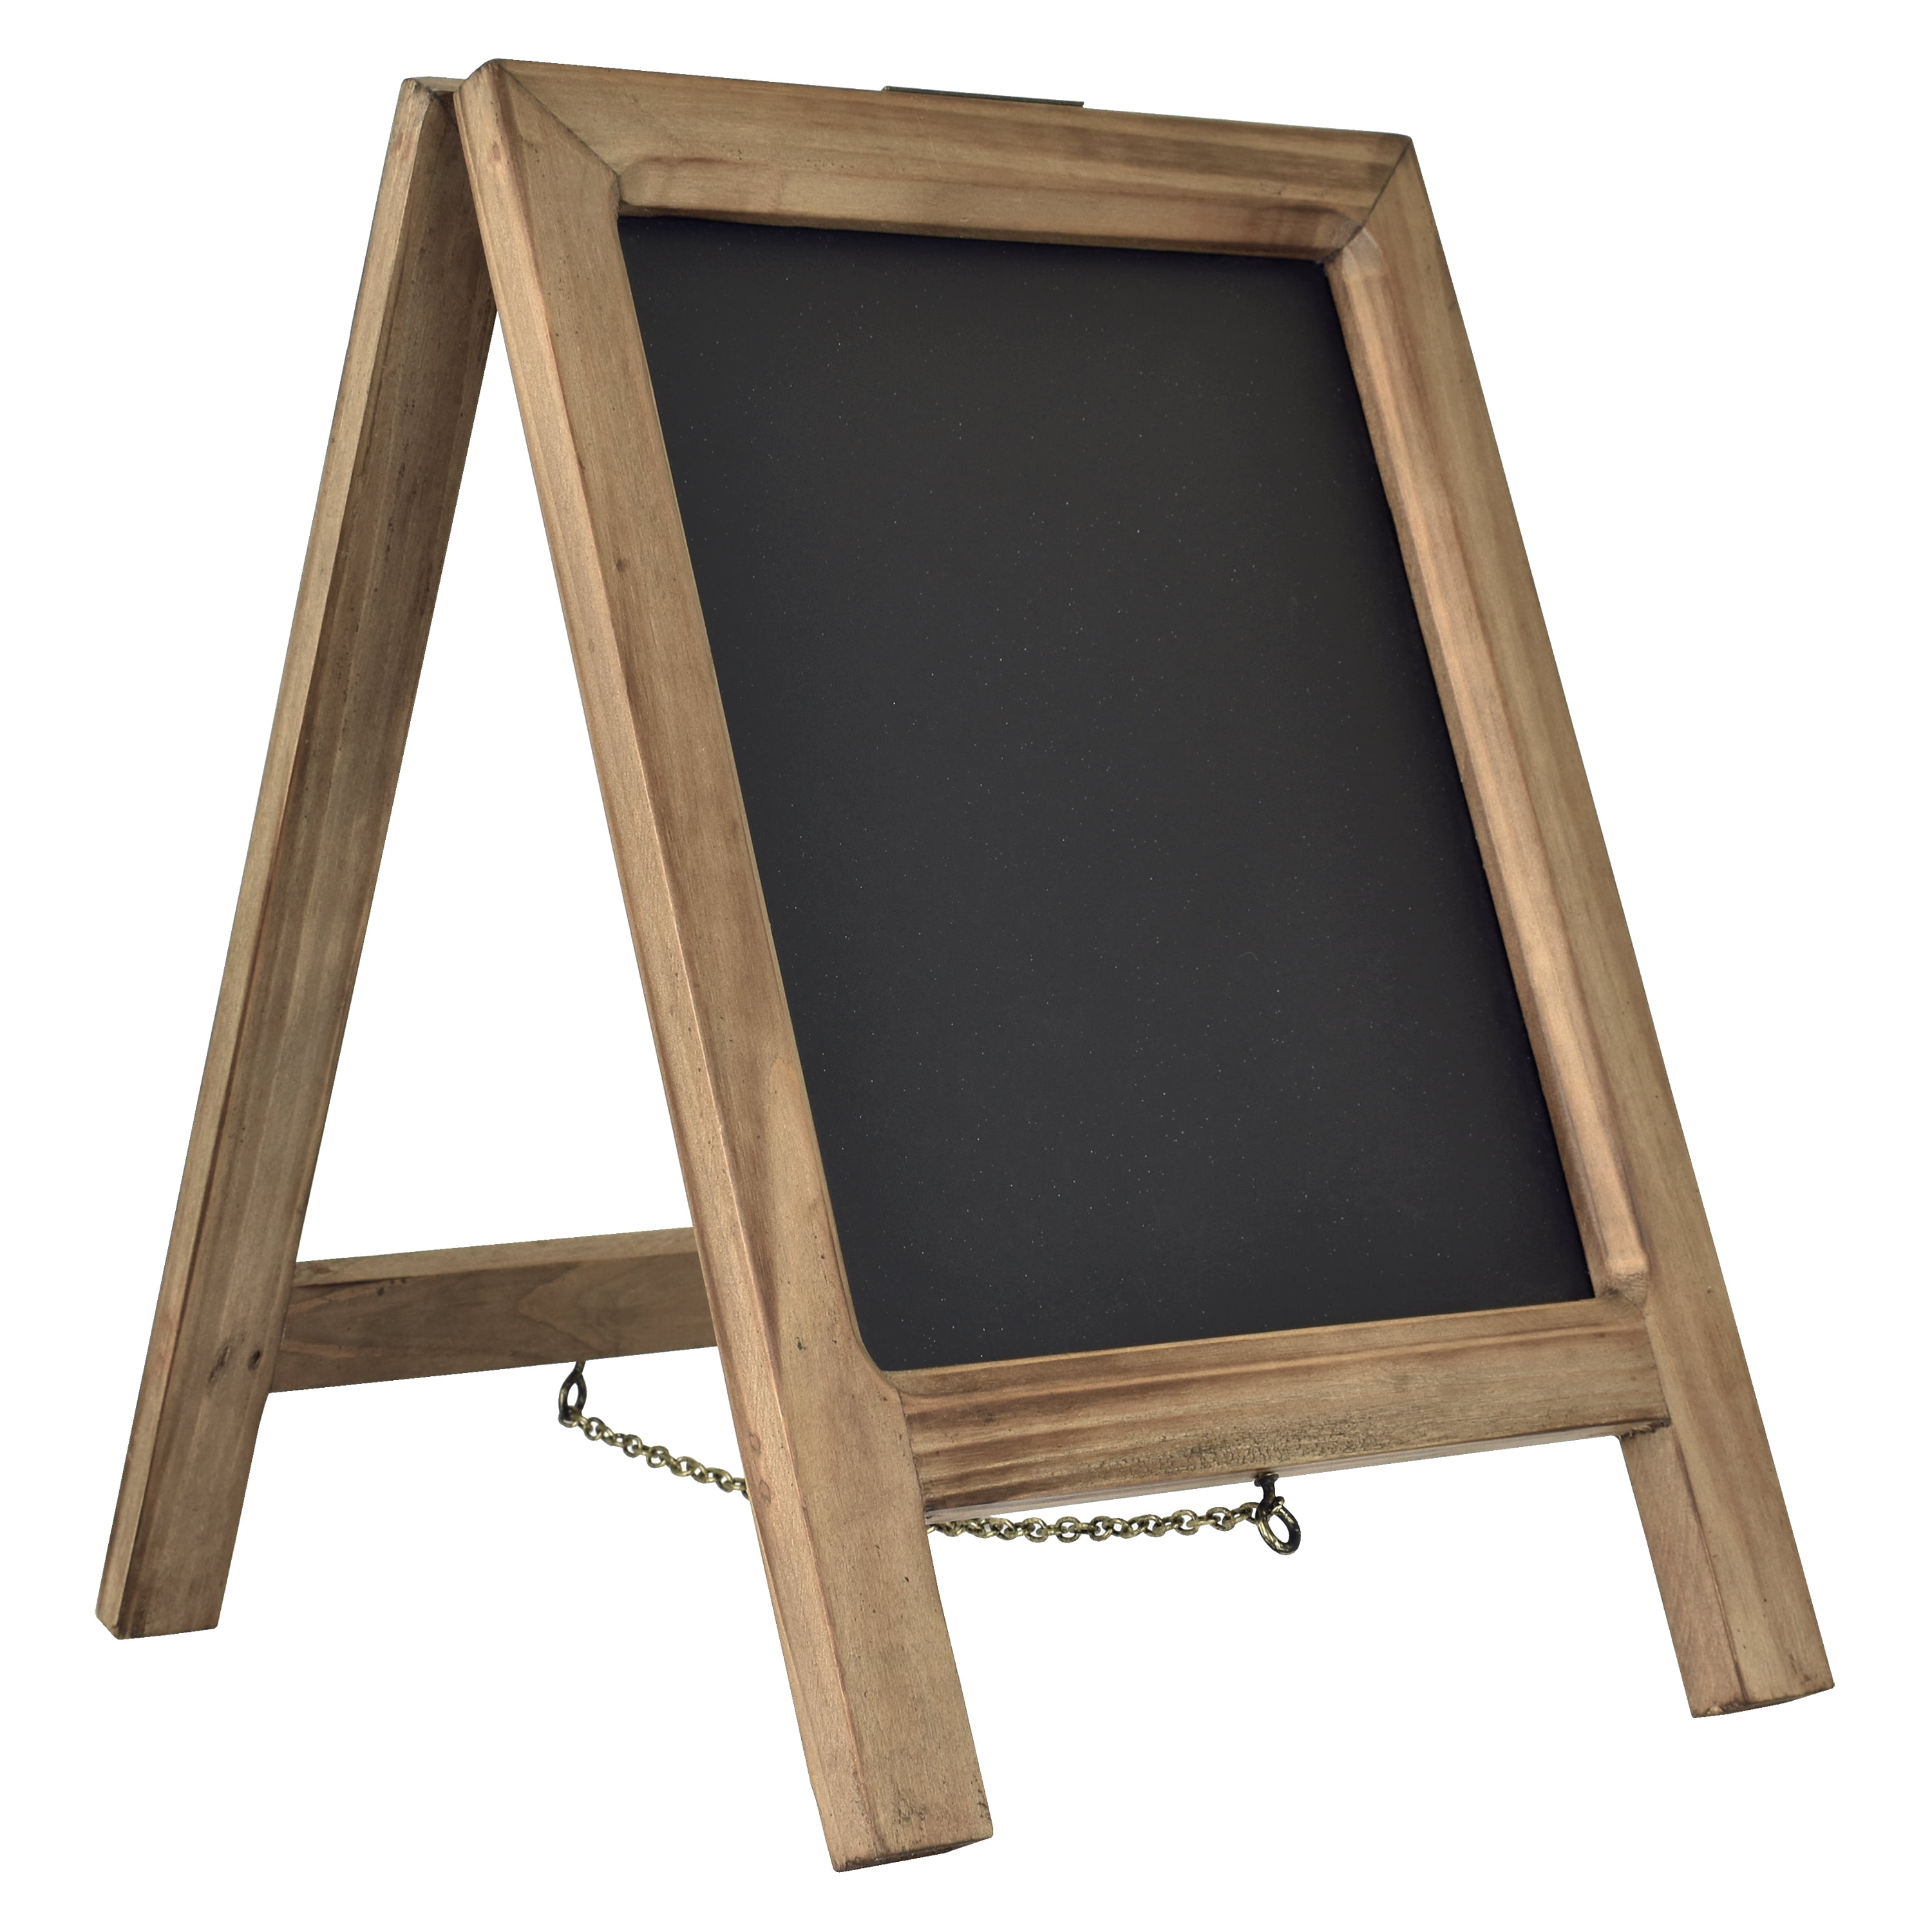 Desktop Drawing Board with Stand Single-Sided Blackboard for Home BQKOZFIN Wooden Magnetic Chalkboard Stores & Special Events Kitchen Decor 12x16, Light walnut Childrens Teaching Drawing Board Office Cafes